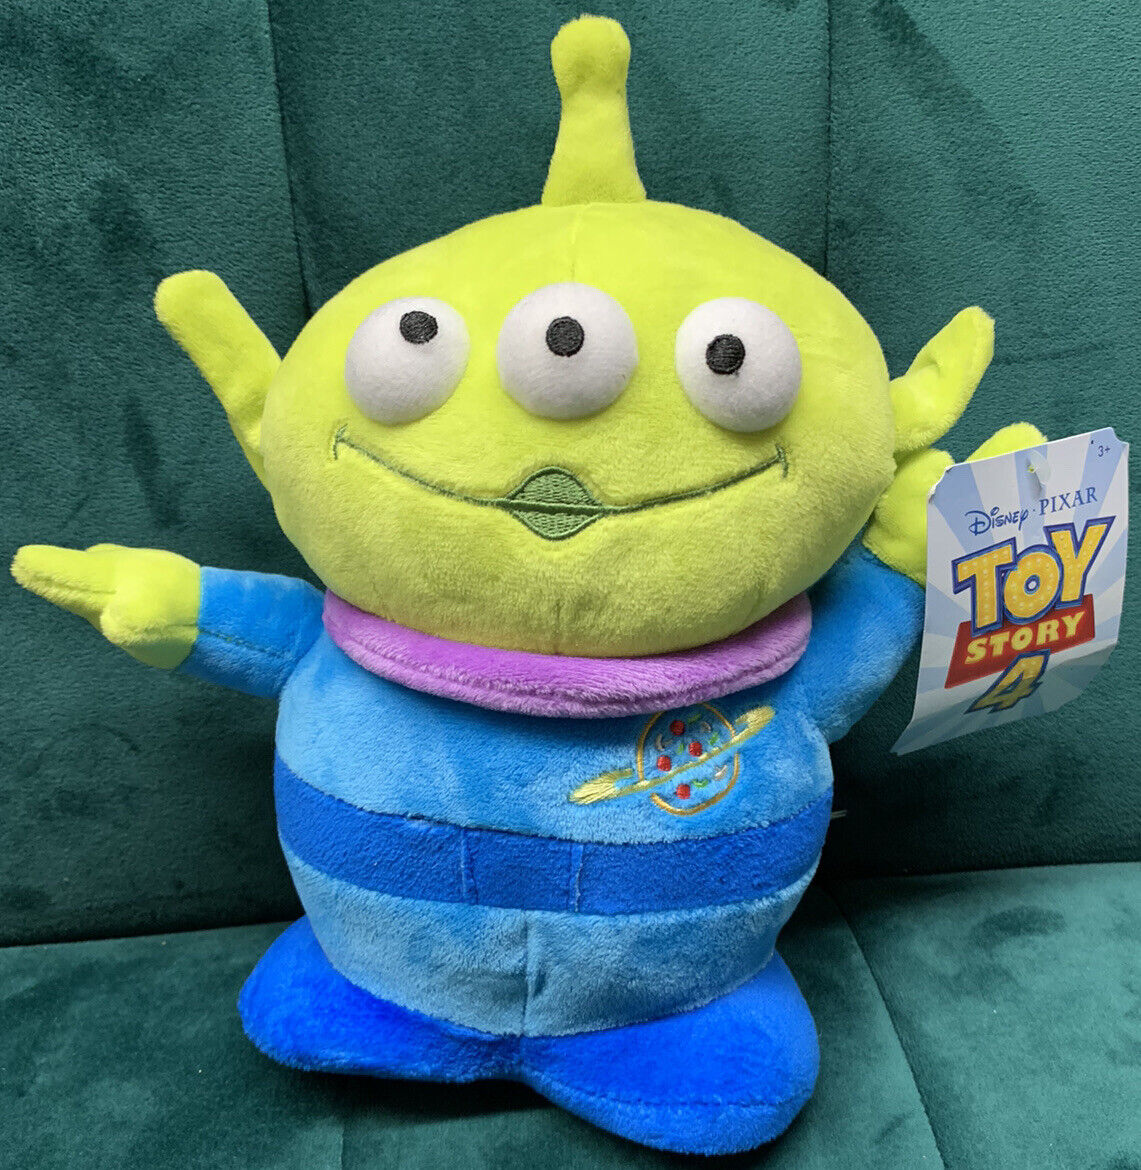 Disney Pixar Toy Story 4 Space Alien Green Plush 10” The Claw Pizza Planet